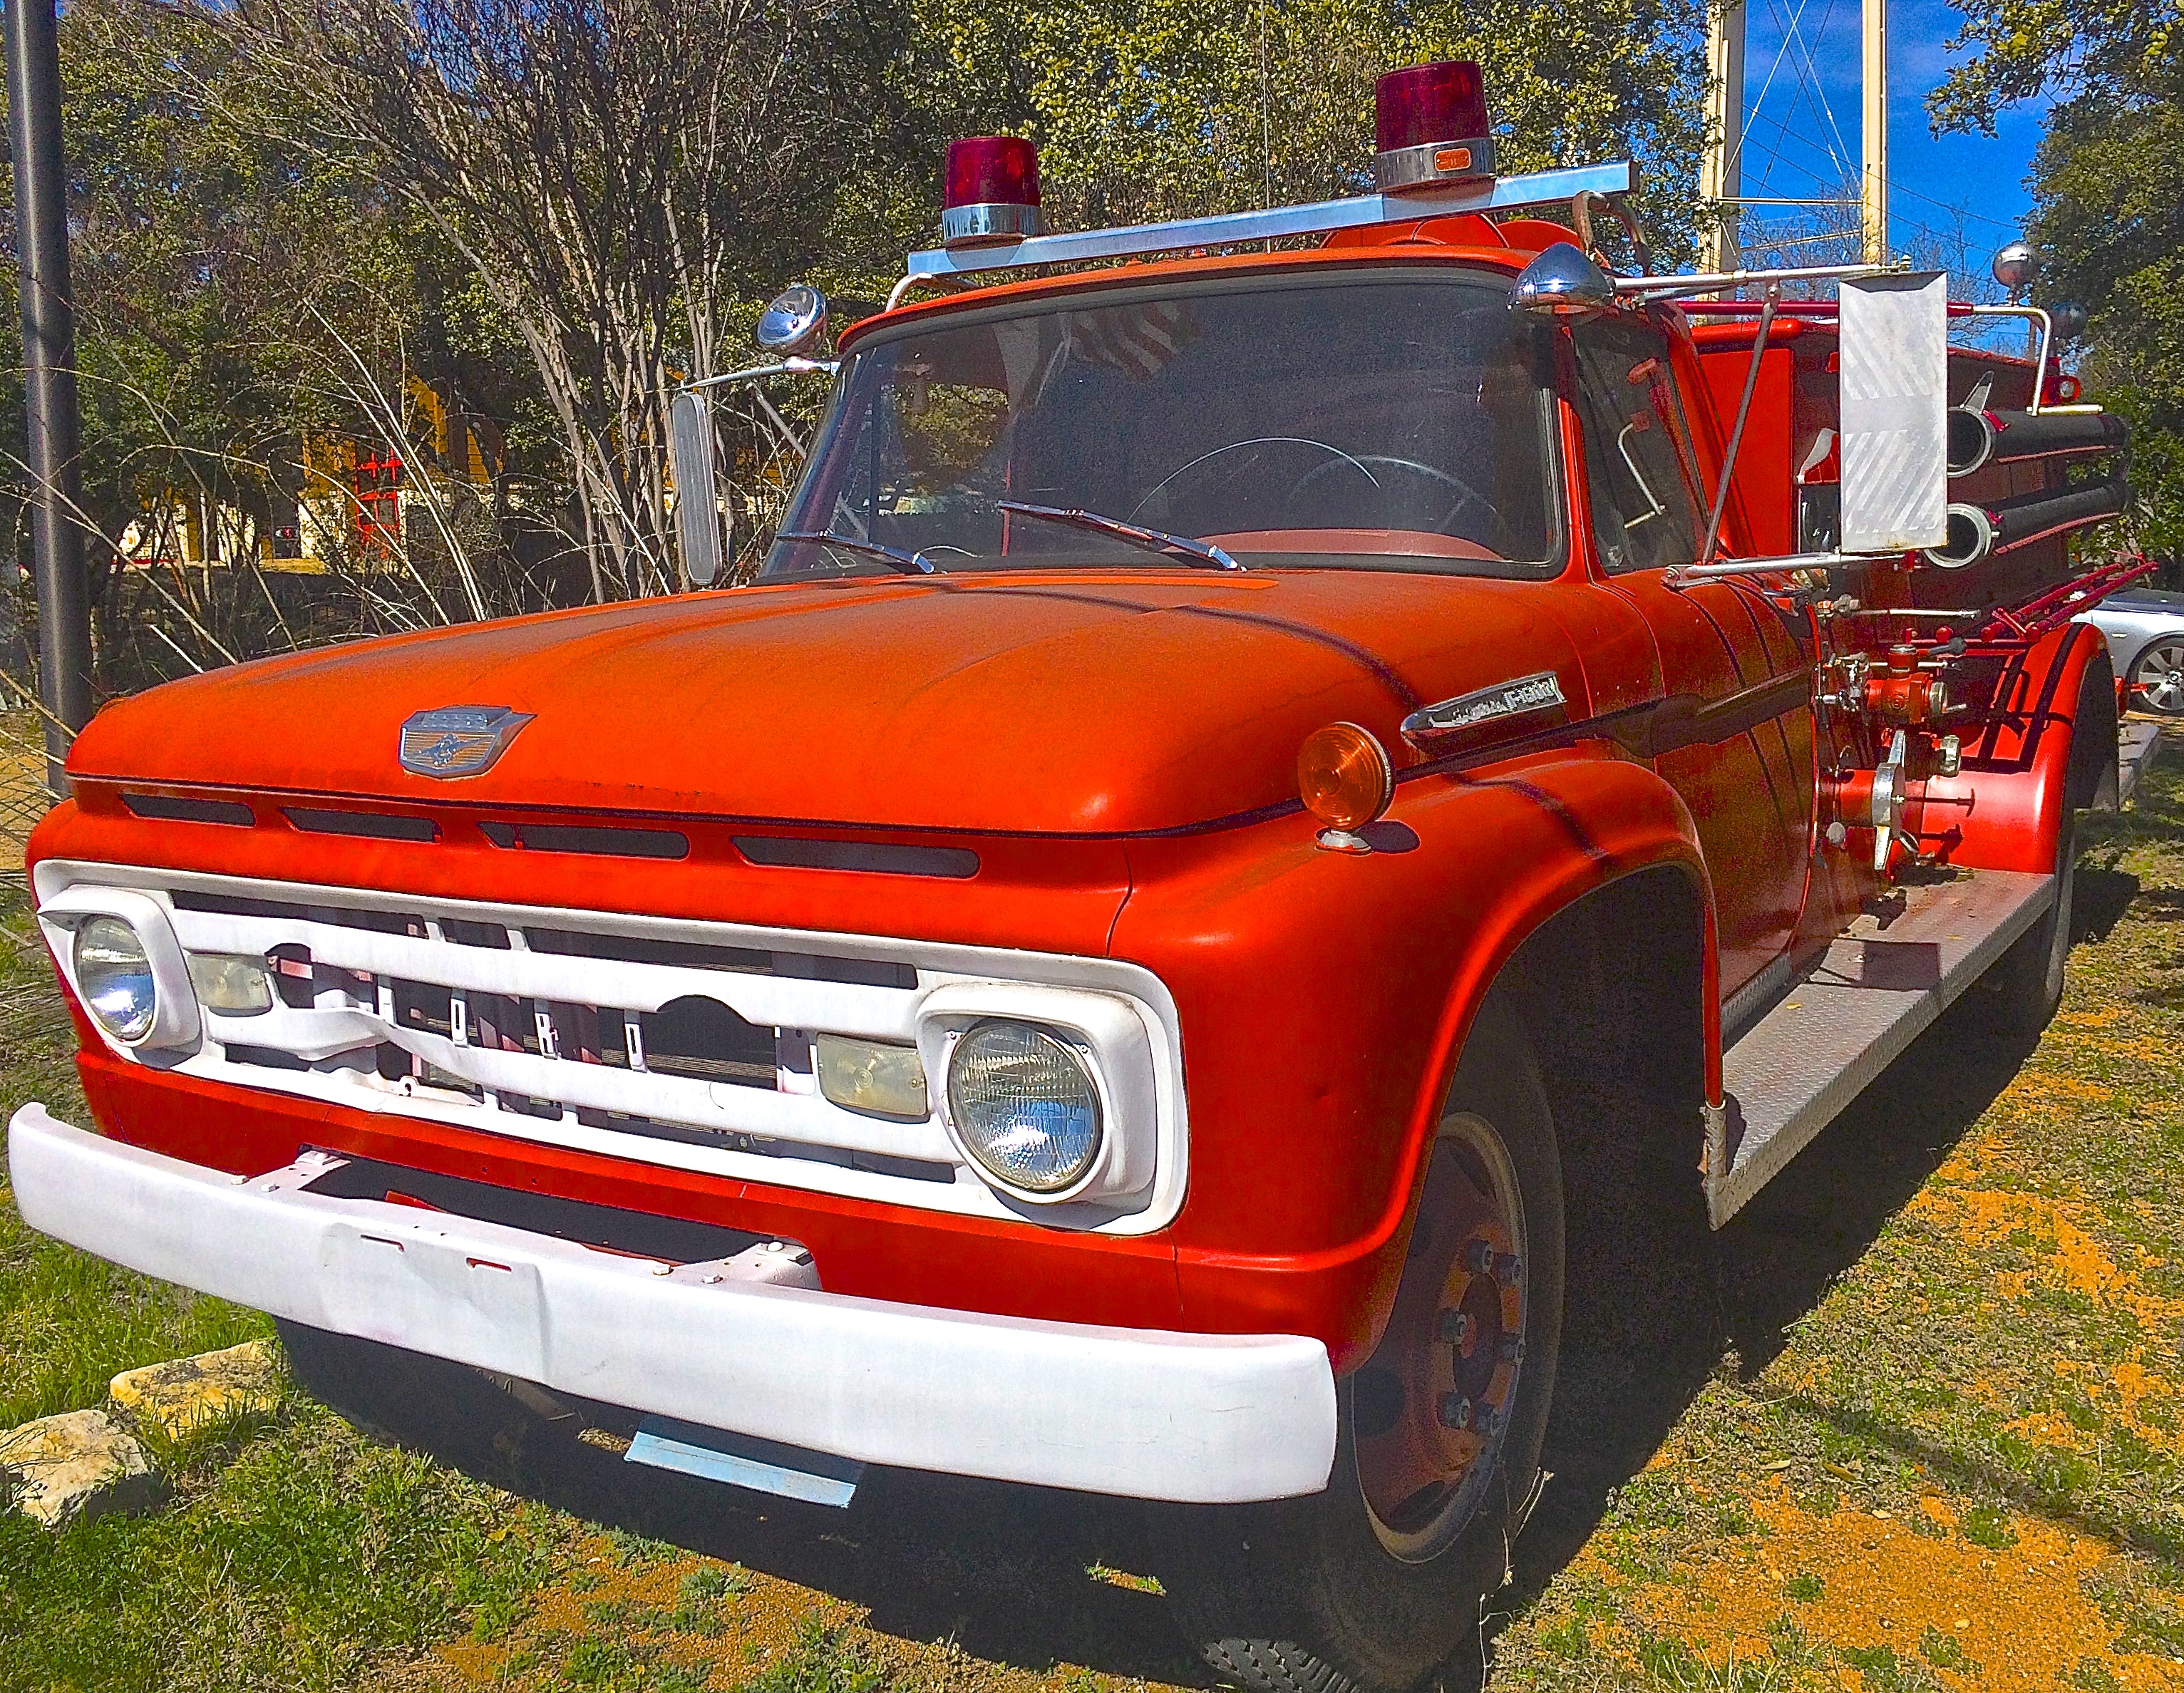 Antique ford fire trucks #5